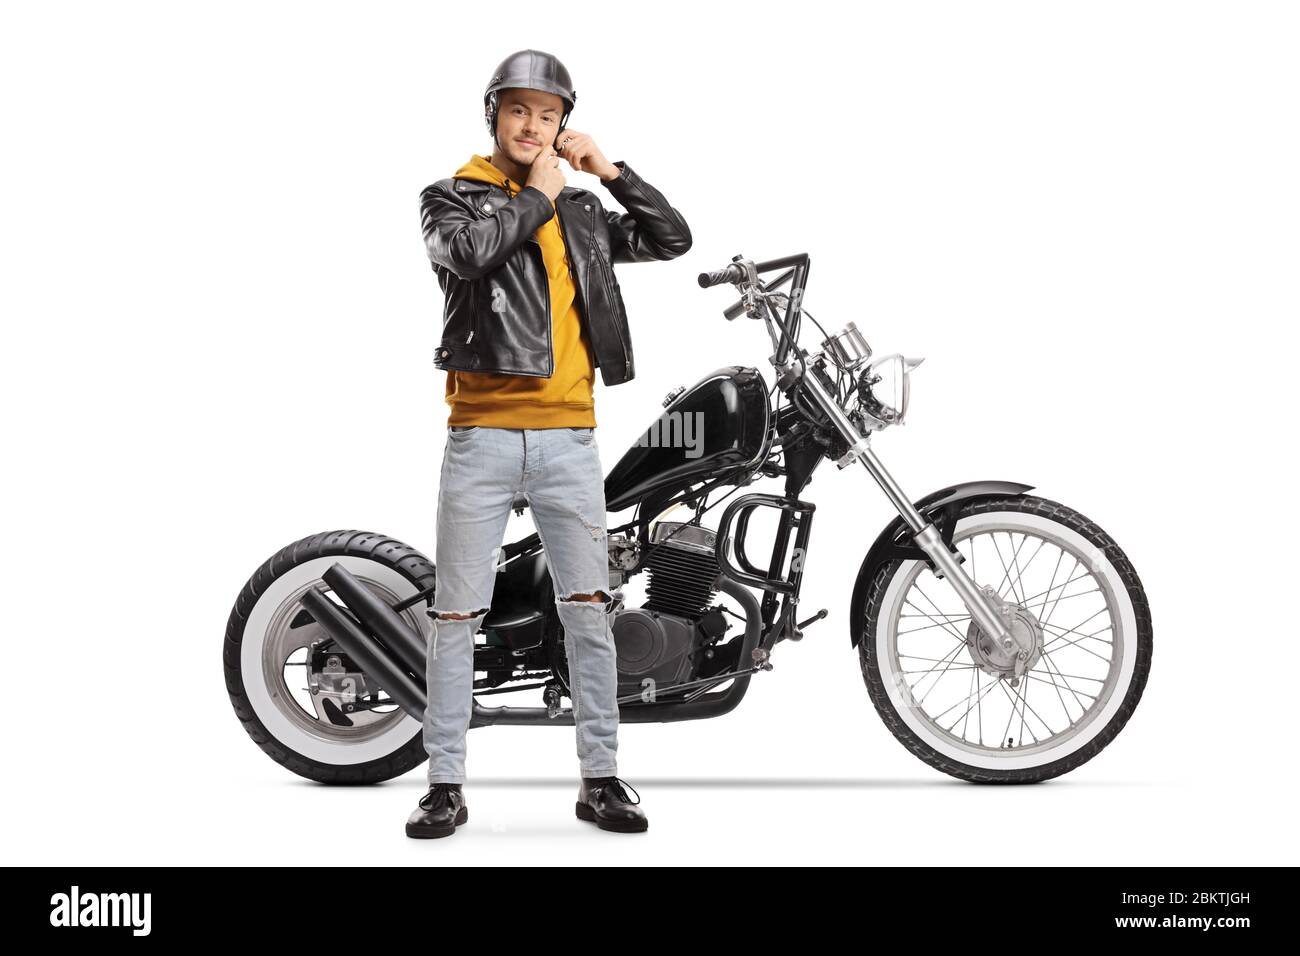 Young biker taking off helmet and standing next to chopper motorbike isolated on white background Stock Photo